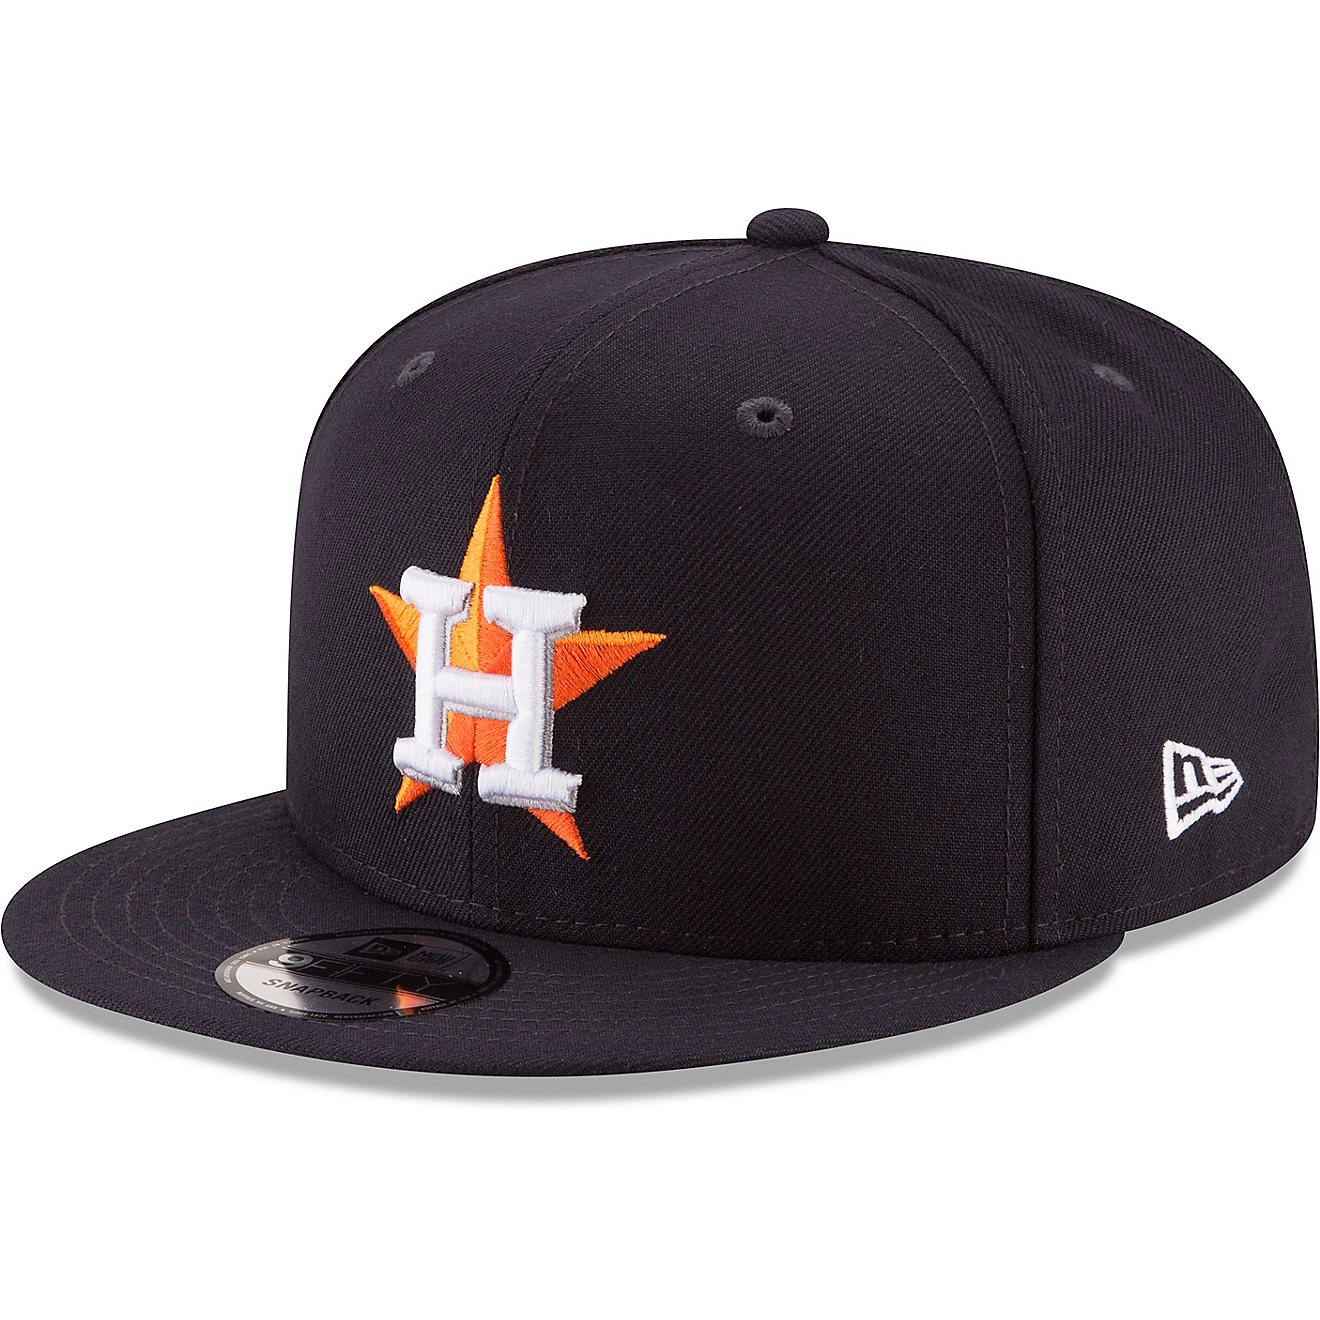 New Era Houston Astros 2022 World Series Champs Side Patch 9FIFTY Cap                                                            - view number 1